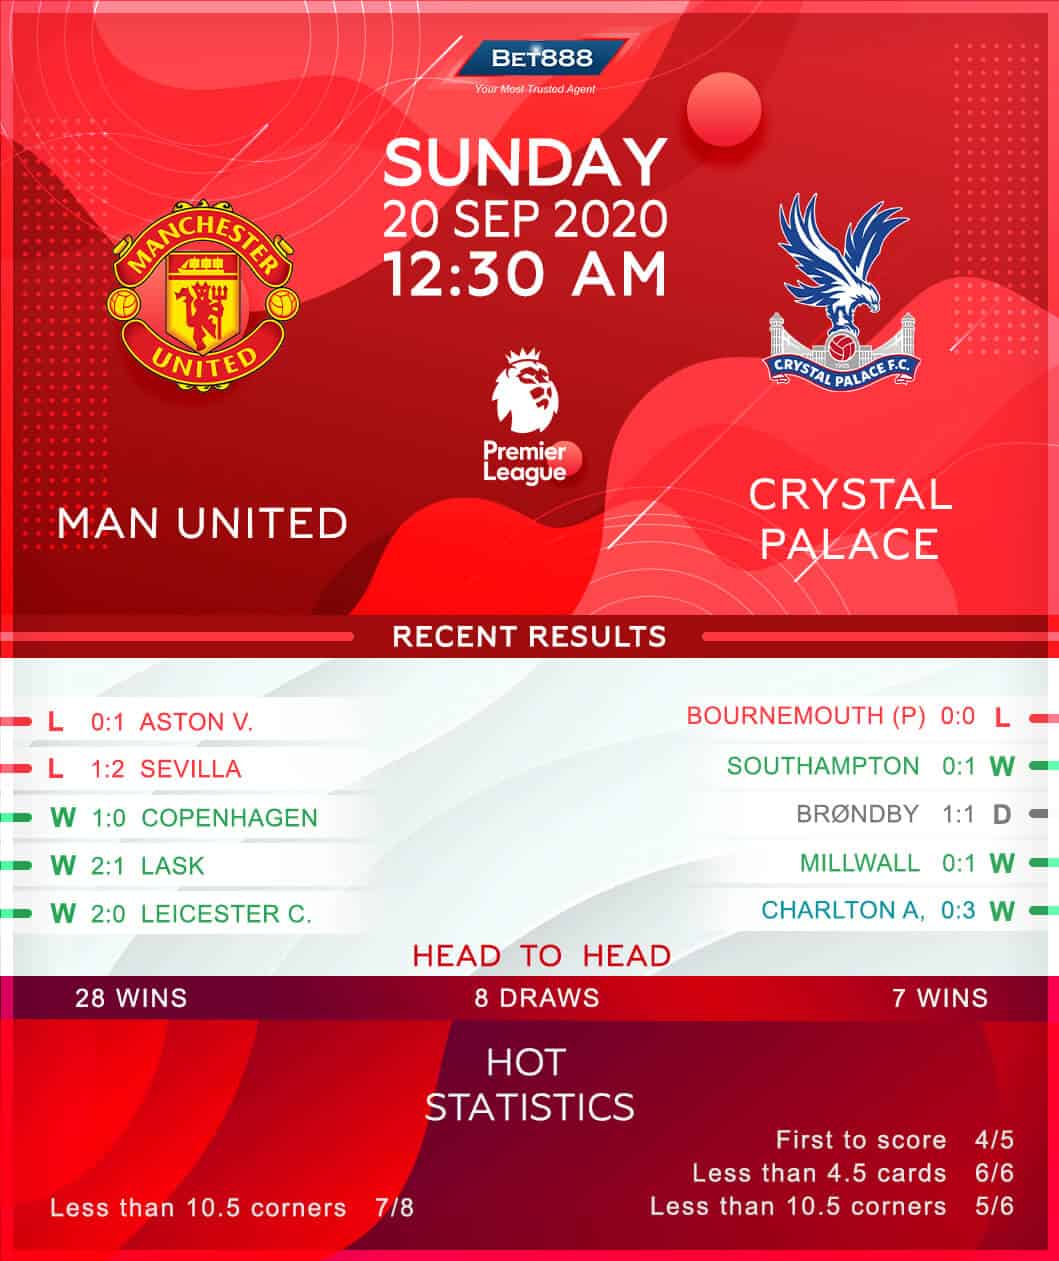 Manchester United vs Crystal Palace 20/09/20